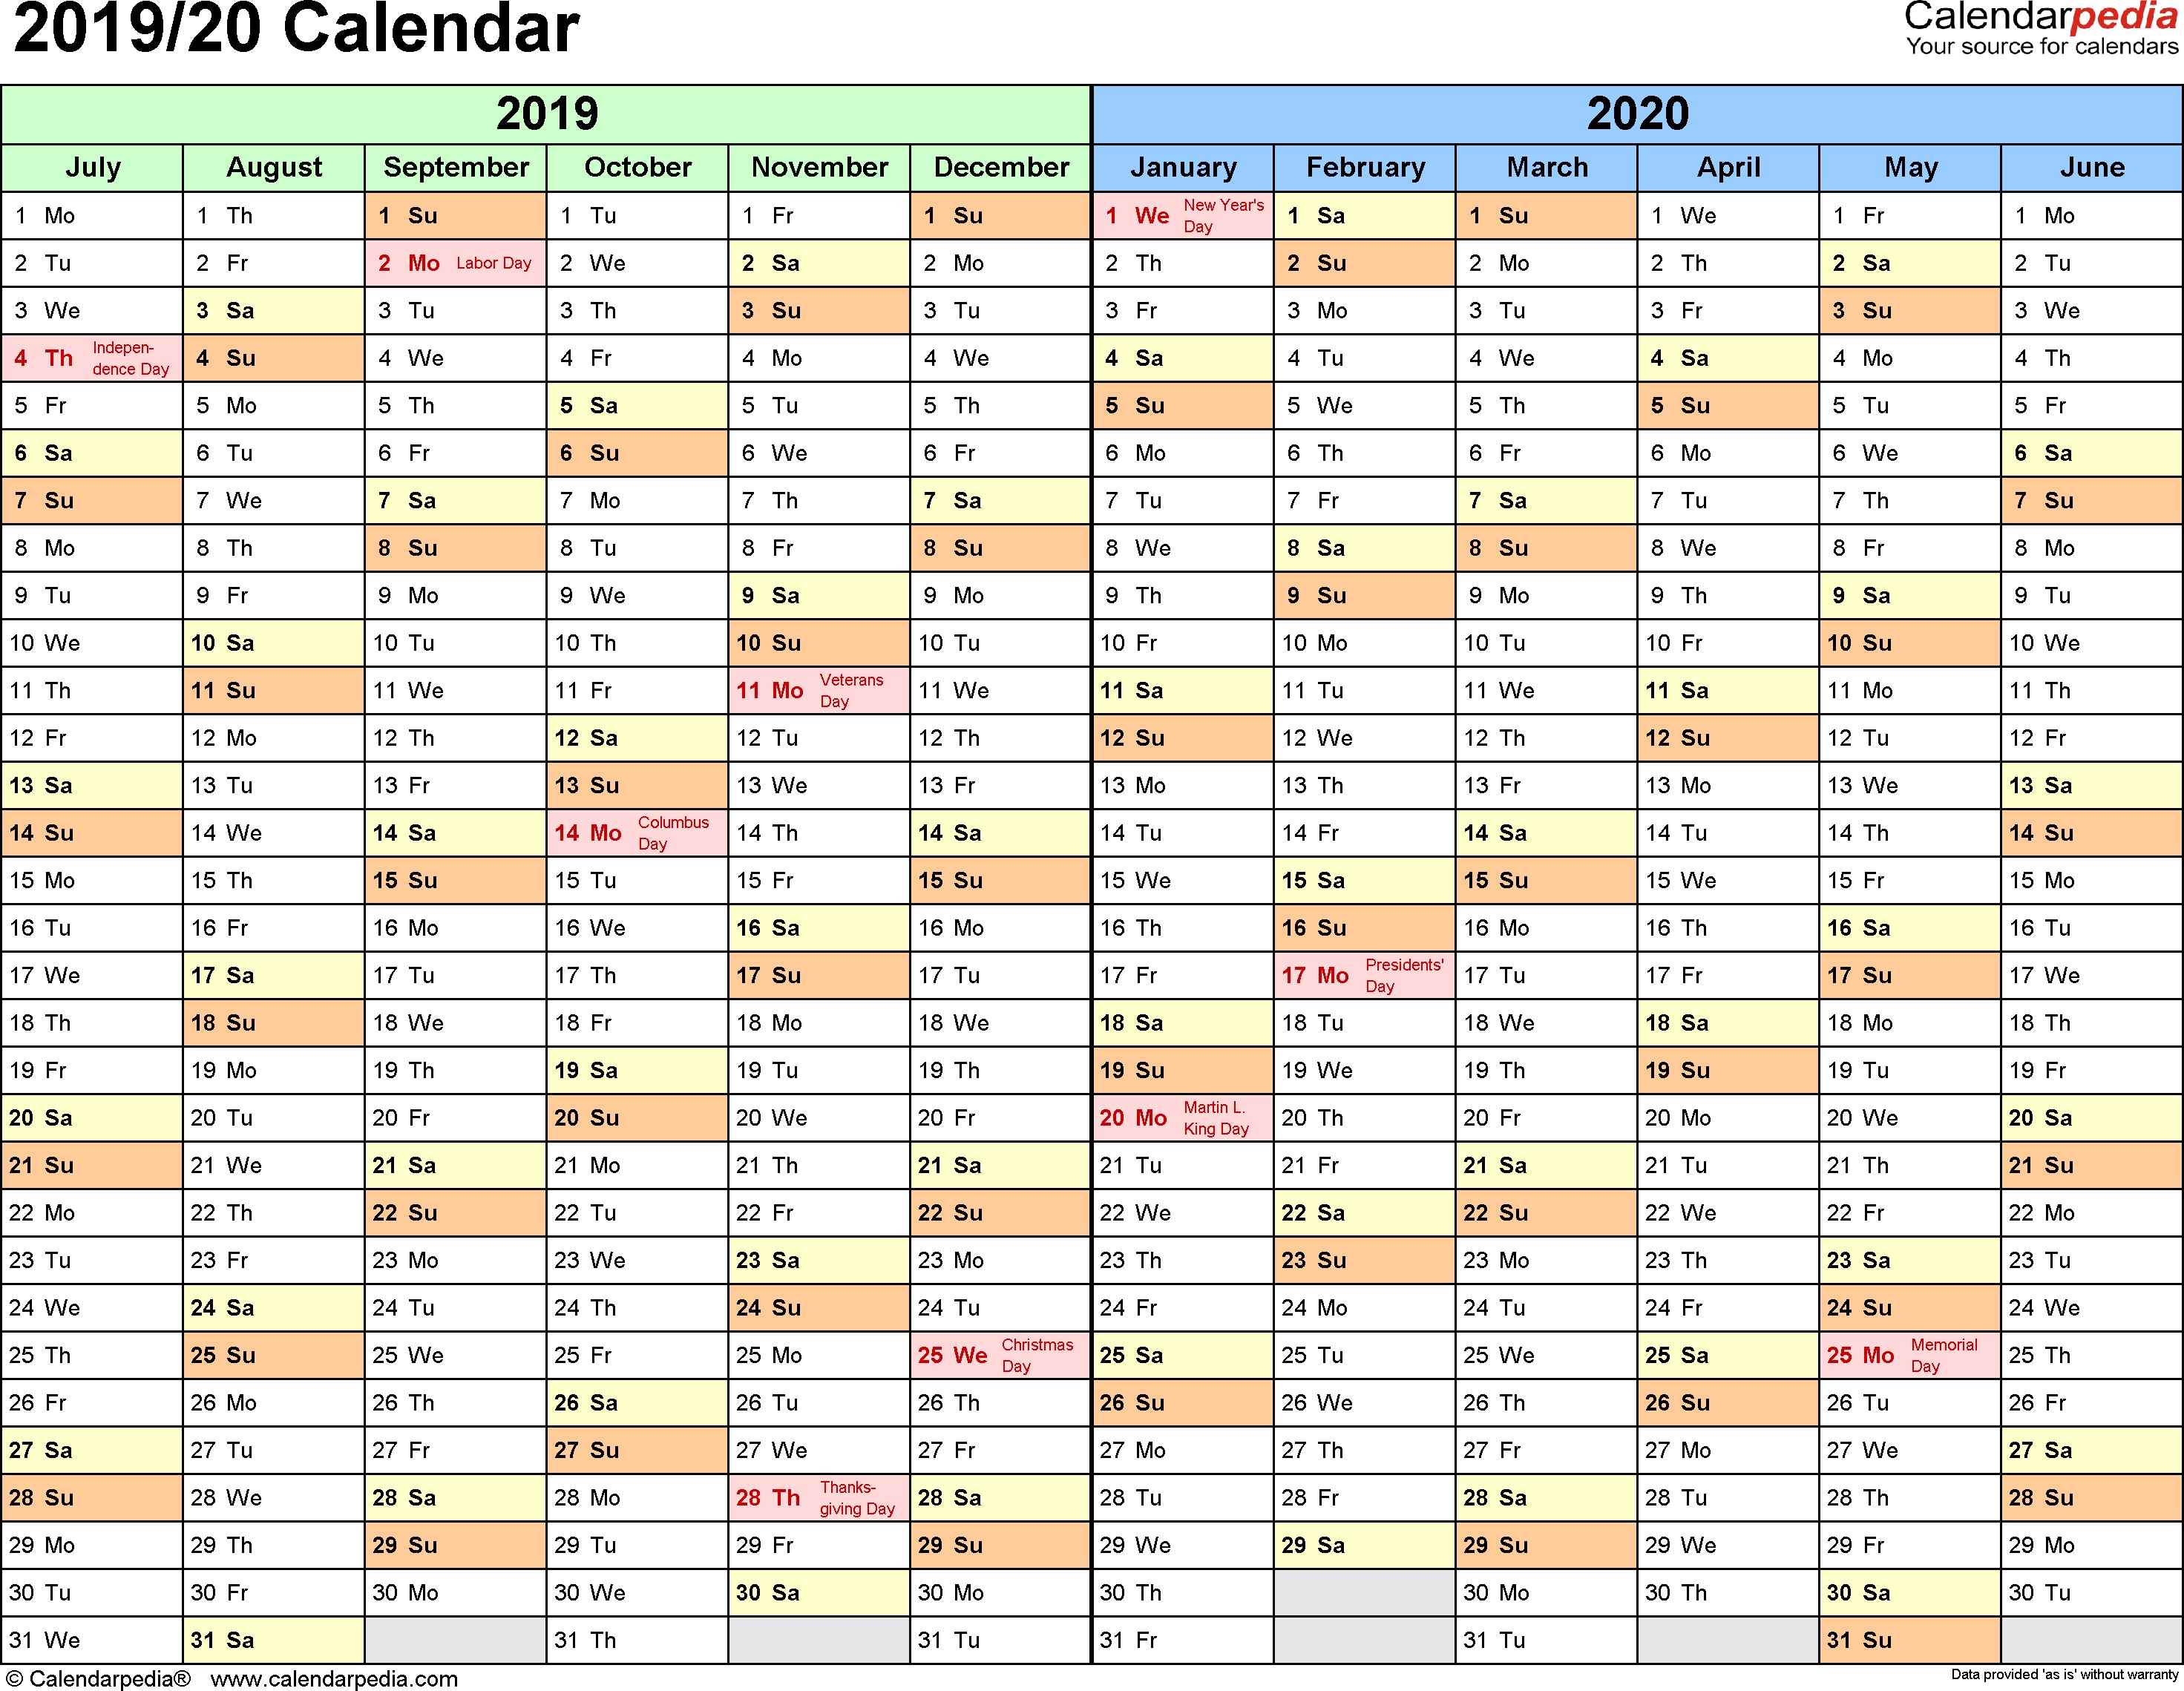 Split Year Calendars 2019/2020 (July To June) - Word Templates within Editable Calendar July 2019-June 2020